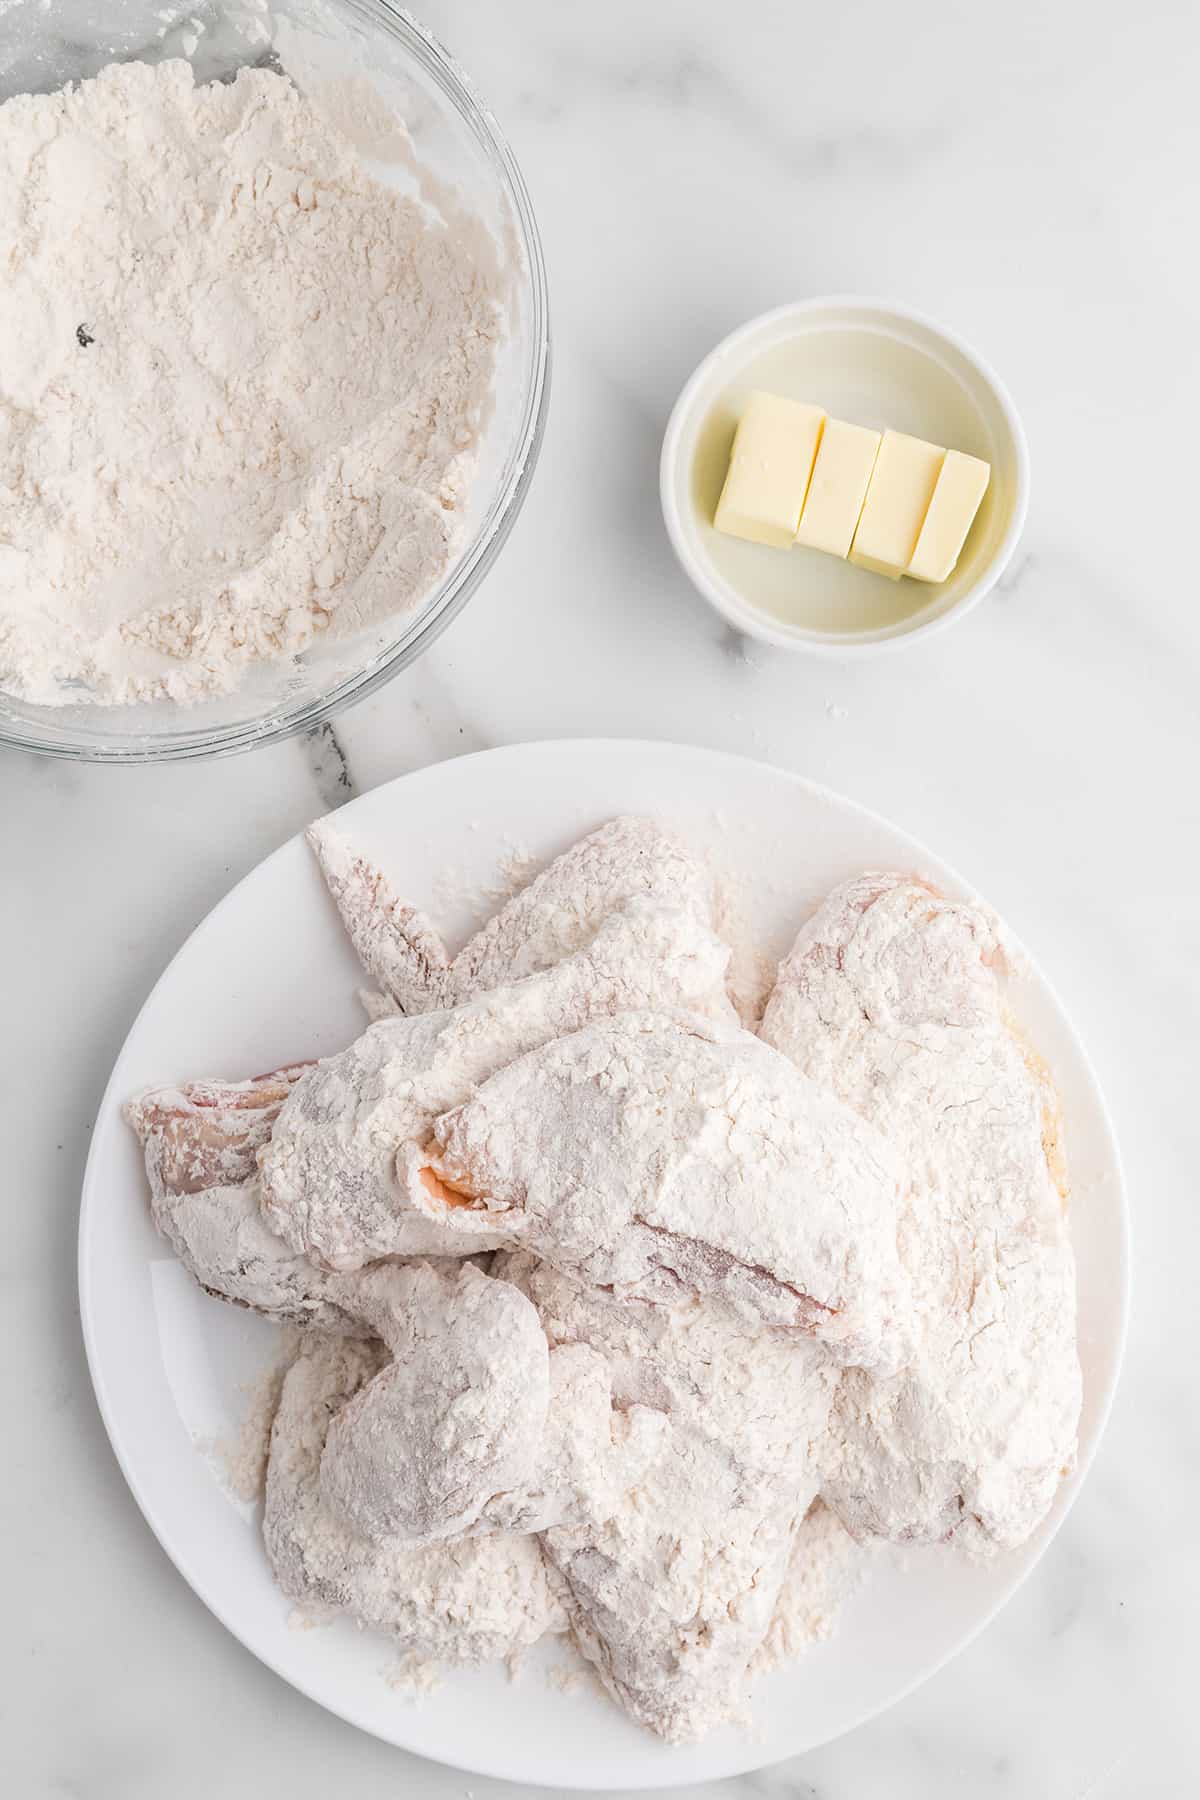 Chicken lightly coated with flour in a bowl.